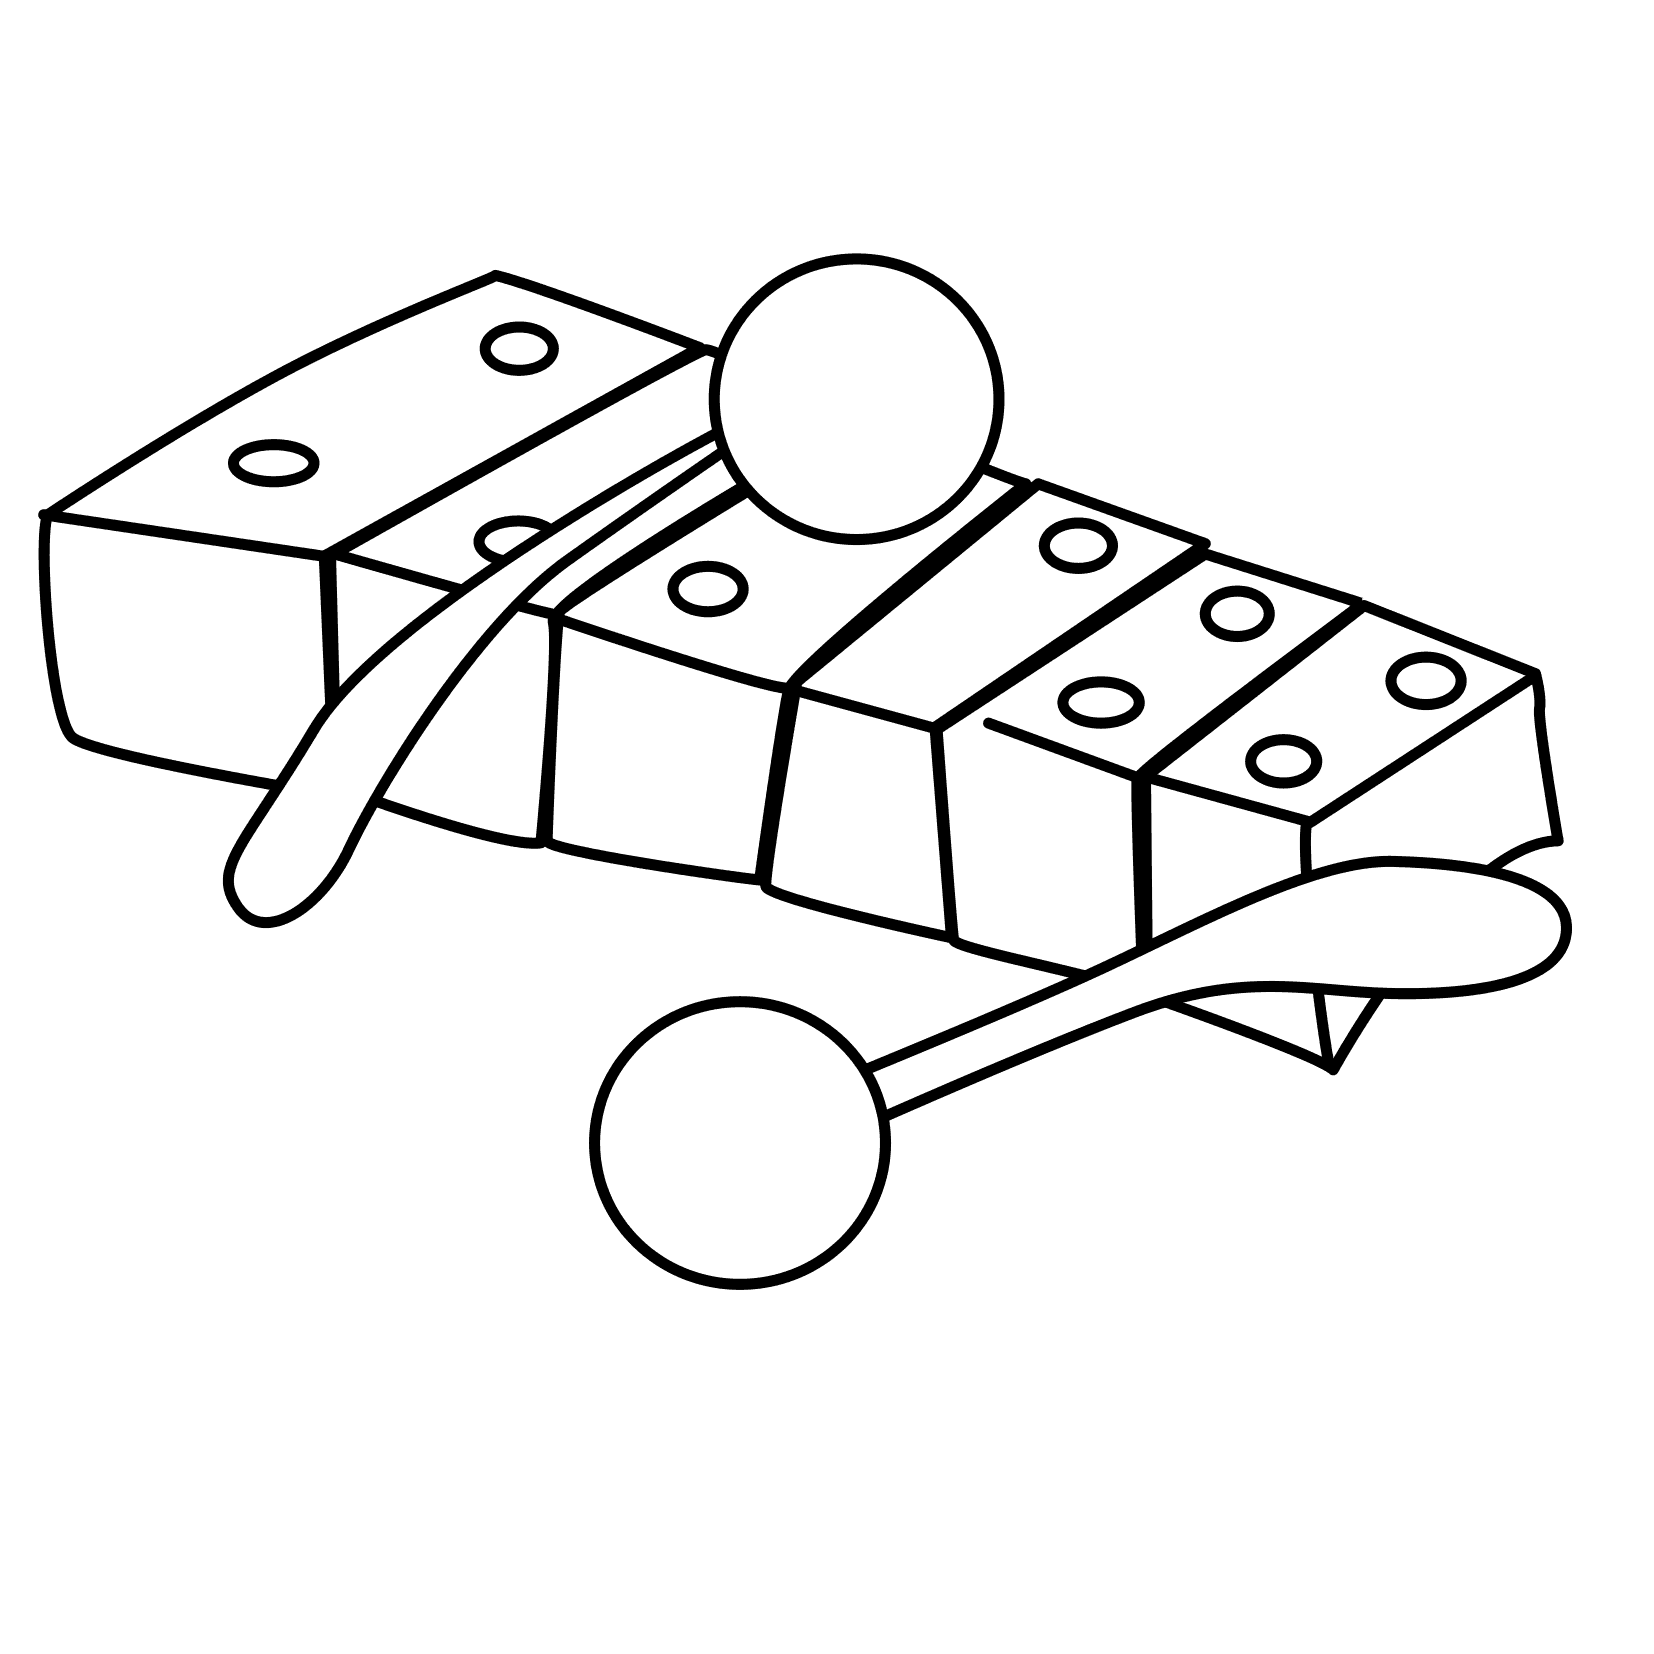 Xylophone Instrument Coloring Pages